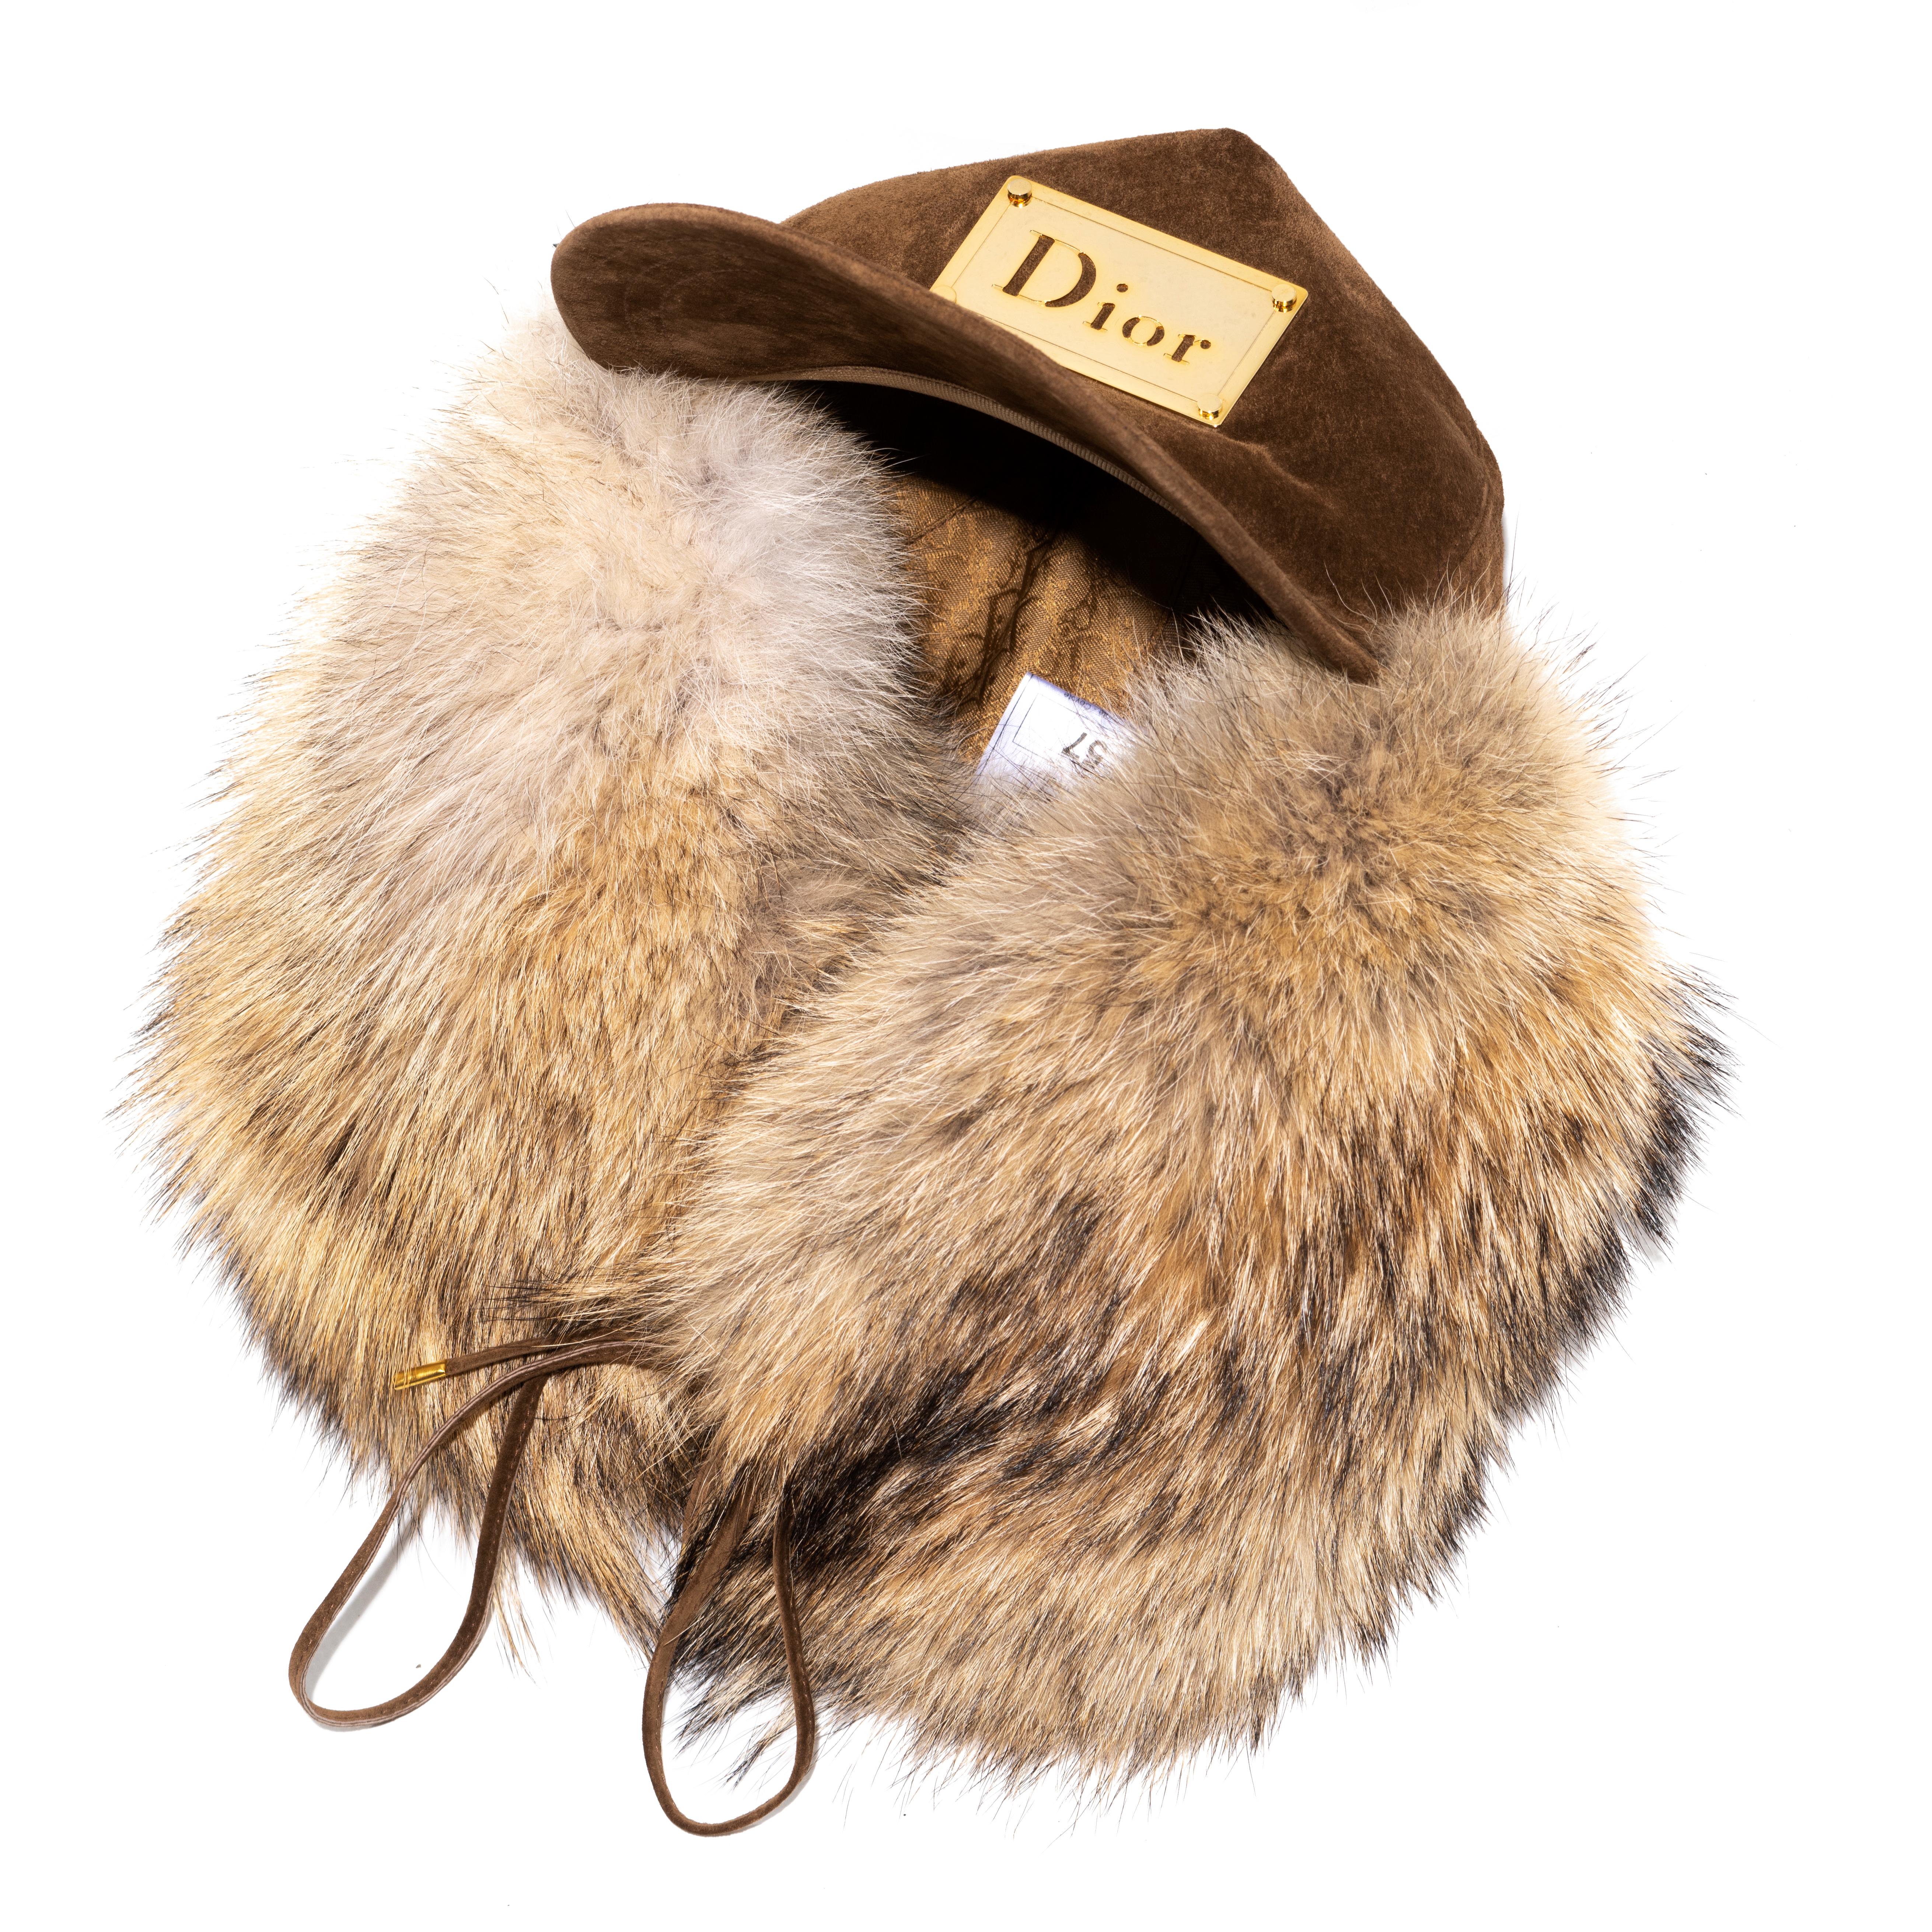 ▪ Christian Dior trapper hat 
▪ Designed by John Galliano
▪ Sold by One of a Kind Archive
▪ Constructed from brown leather pigskin and coyote fur 
▪ Gold-tone metal plate with Dior logo 
▪ Monogram lining 
▪ Size: 57
▪ Spring-Summer 2002
▪ Made in